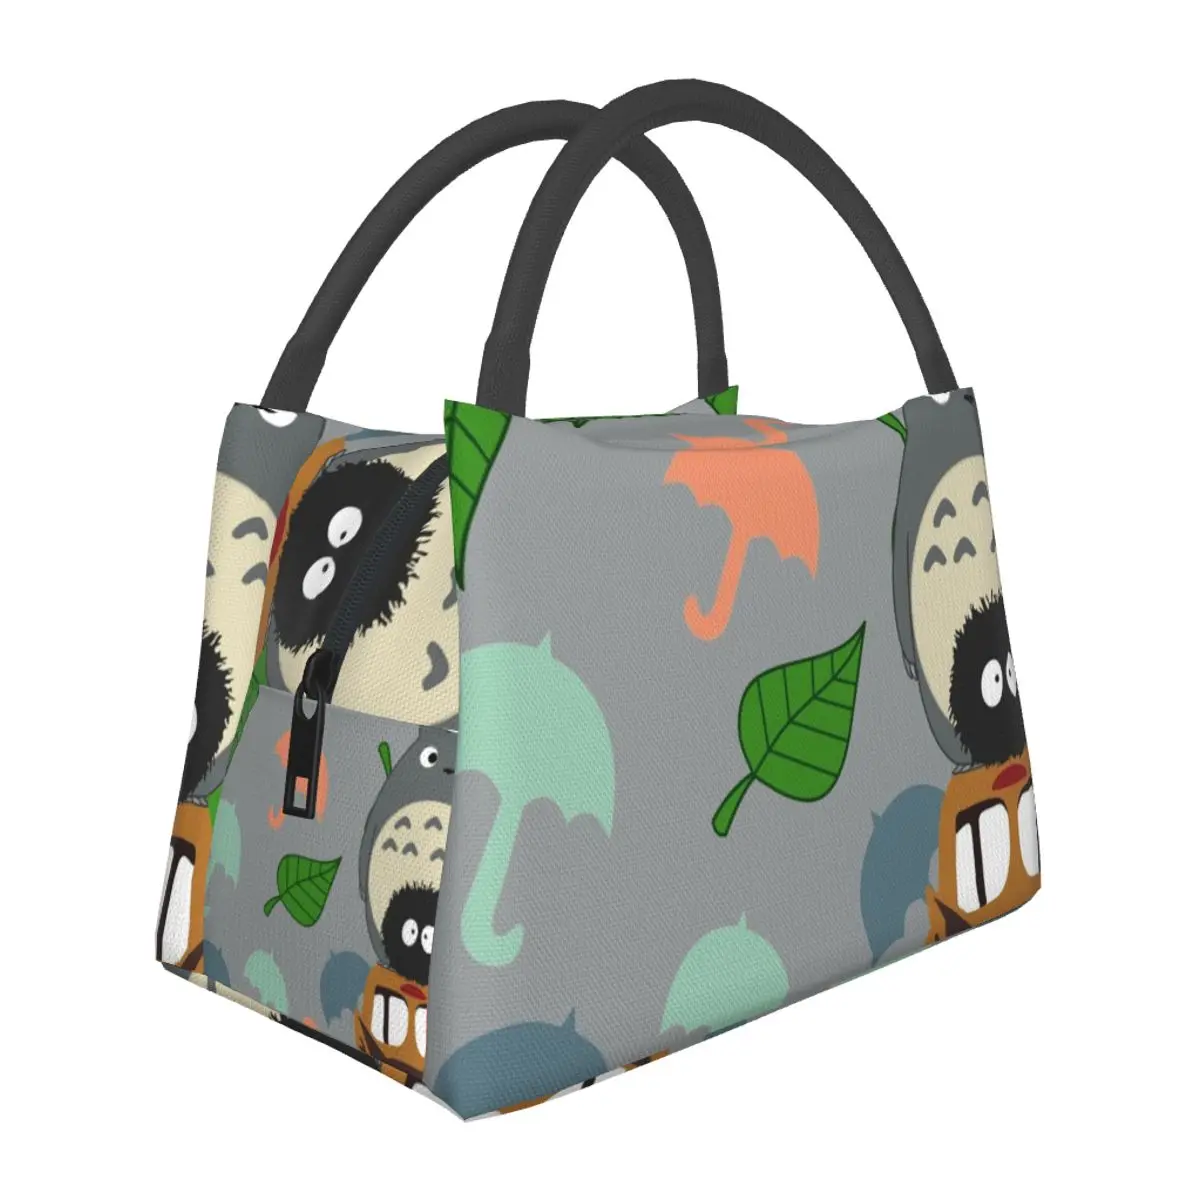 

Totem Totoro Lunch Bag Umbrella Leaves Print Lunch Box Vintage Picnic Cooler Bag Portable Insulated Waterproof Tote Food Bags